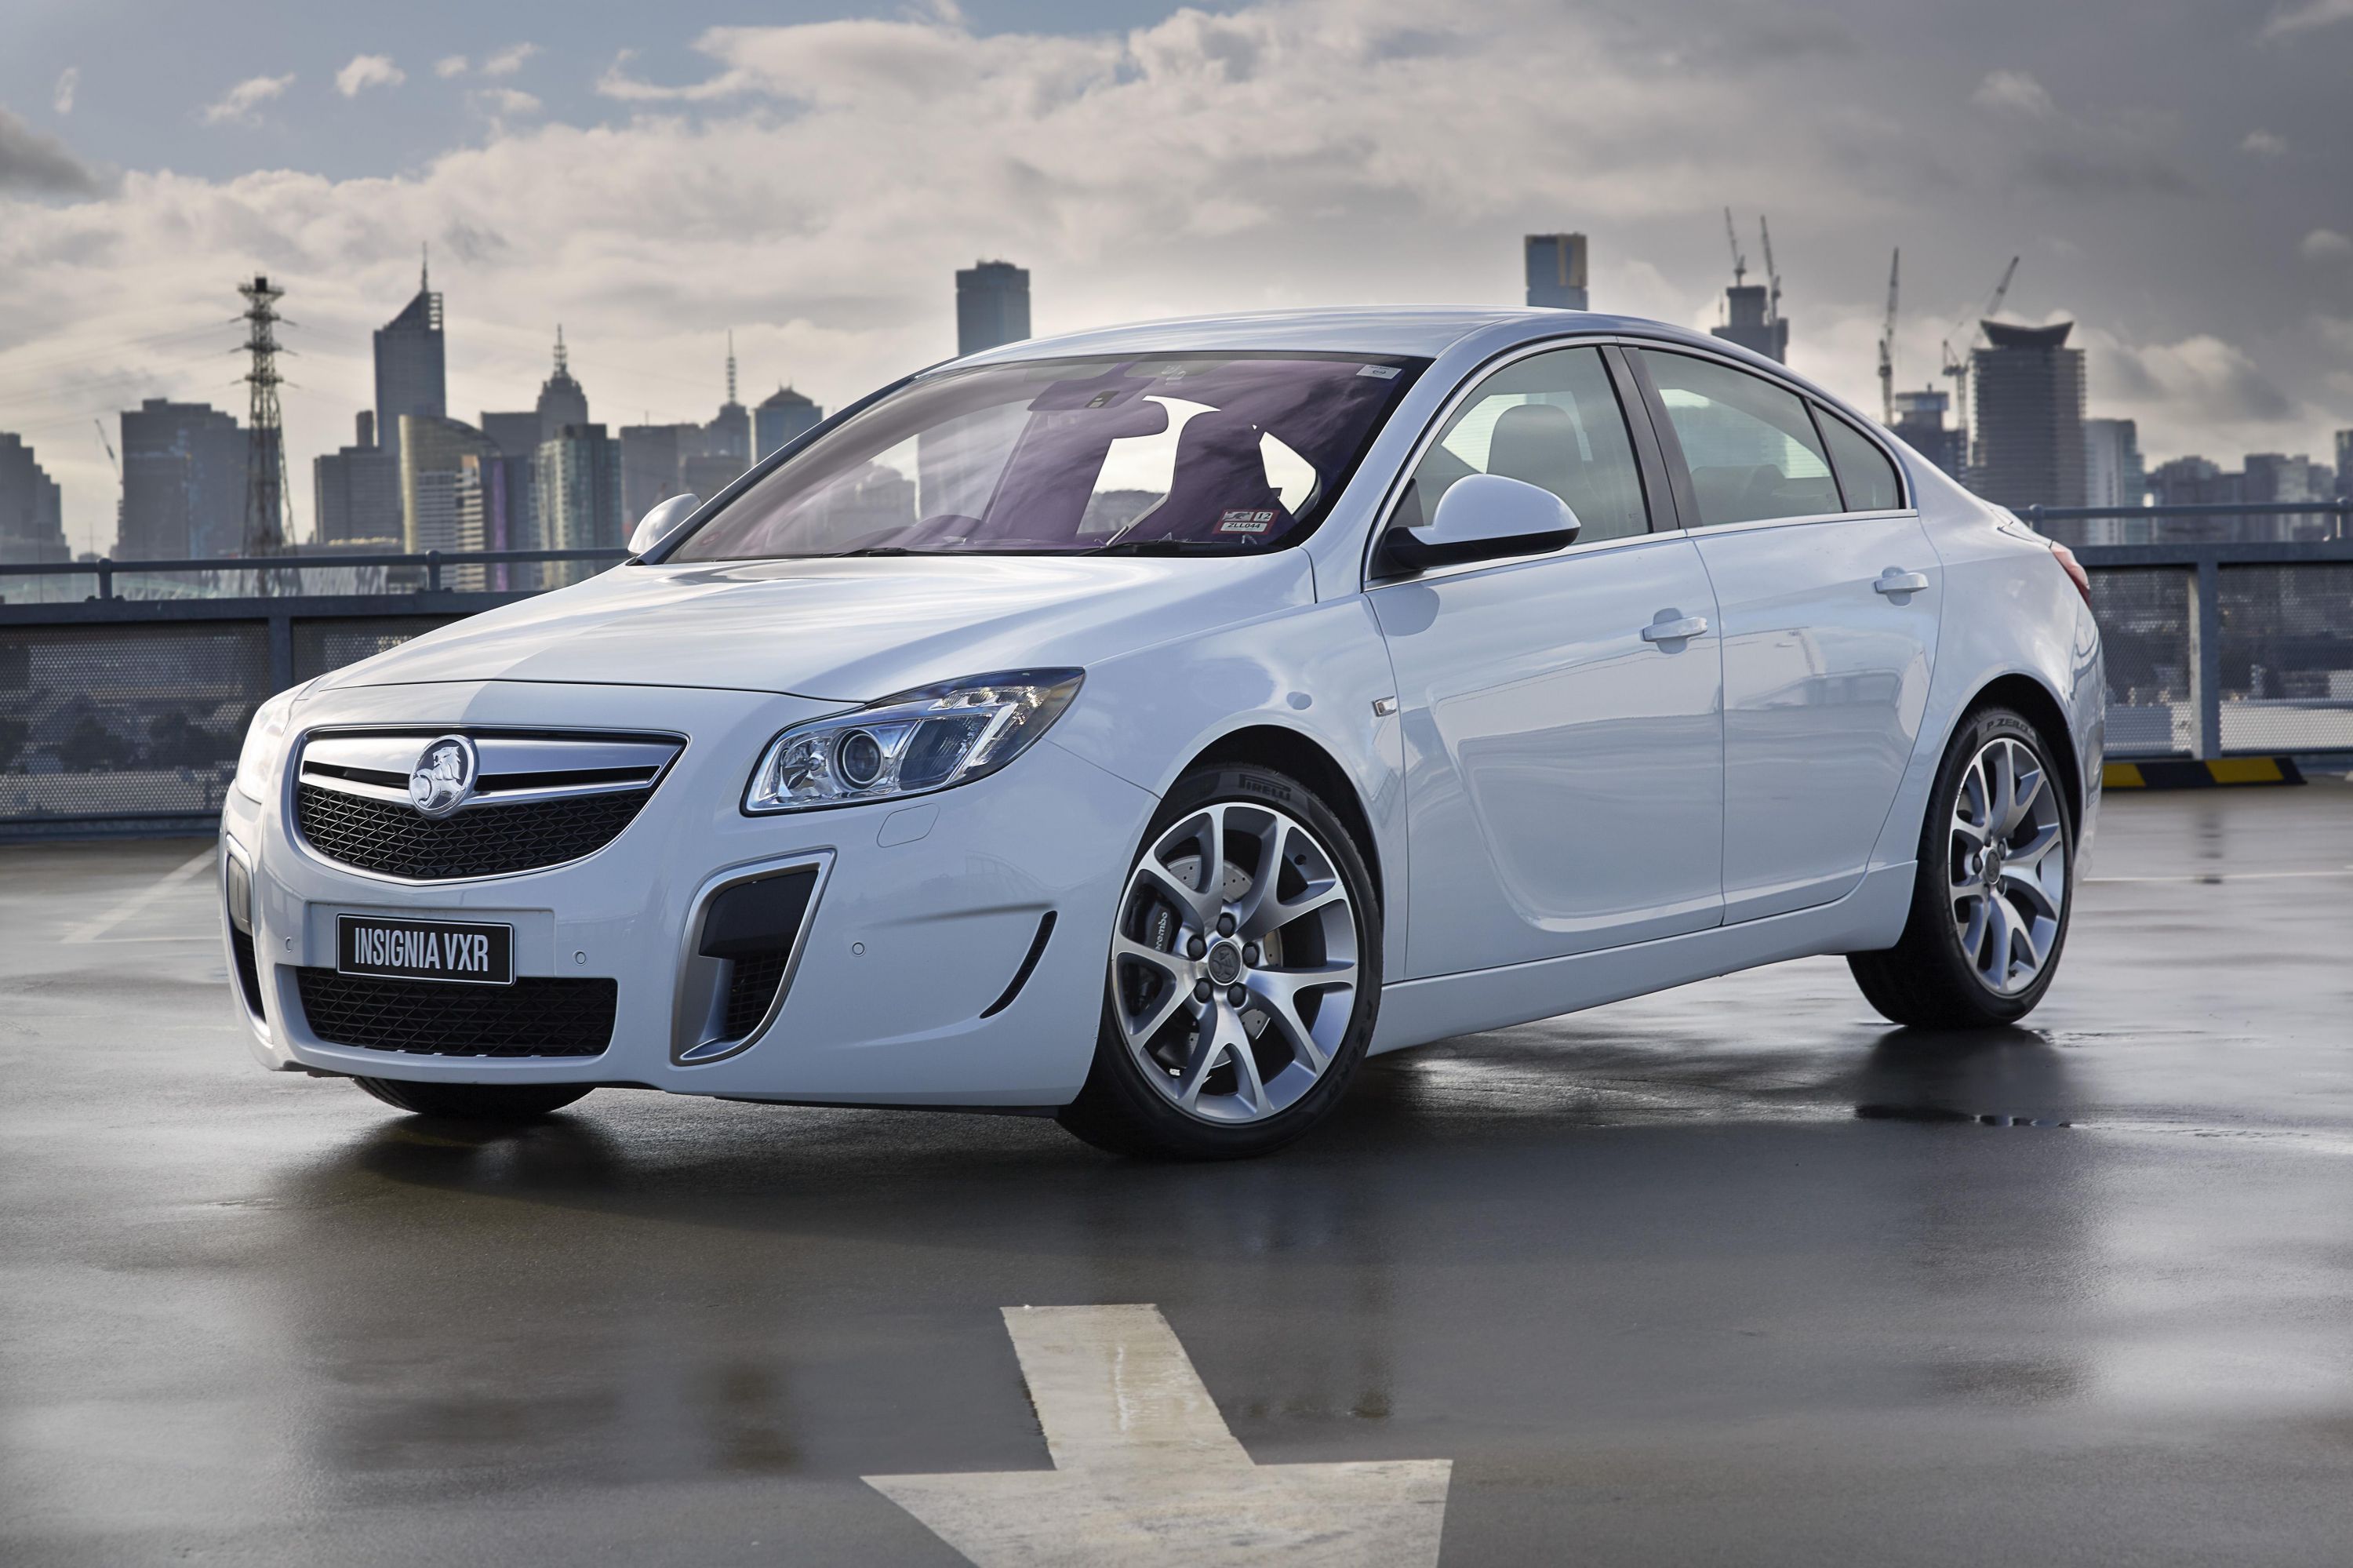 Opel To Discontinue The Insginia, Its Last Remaining GM Model By